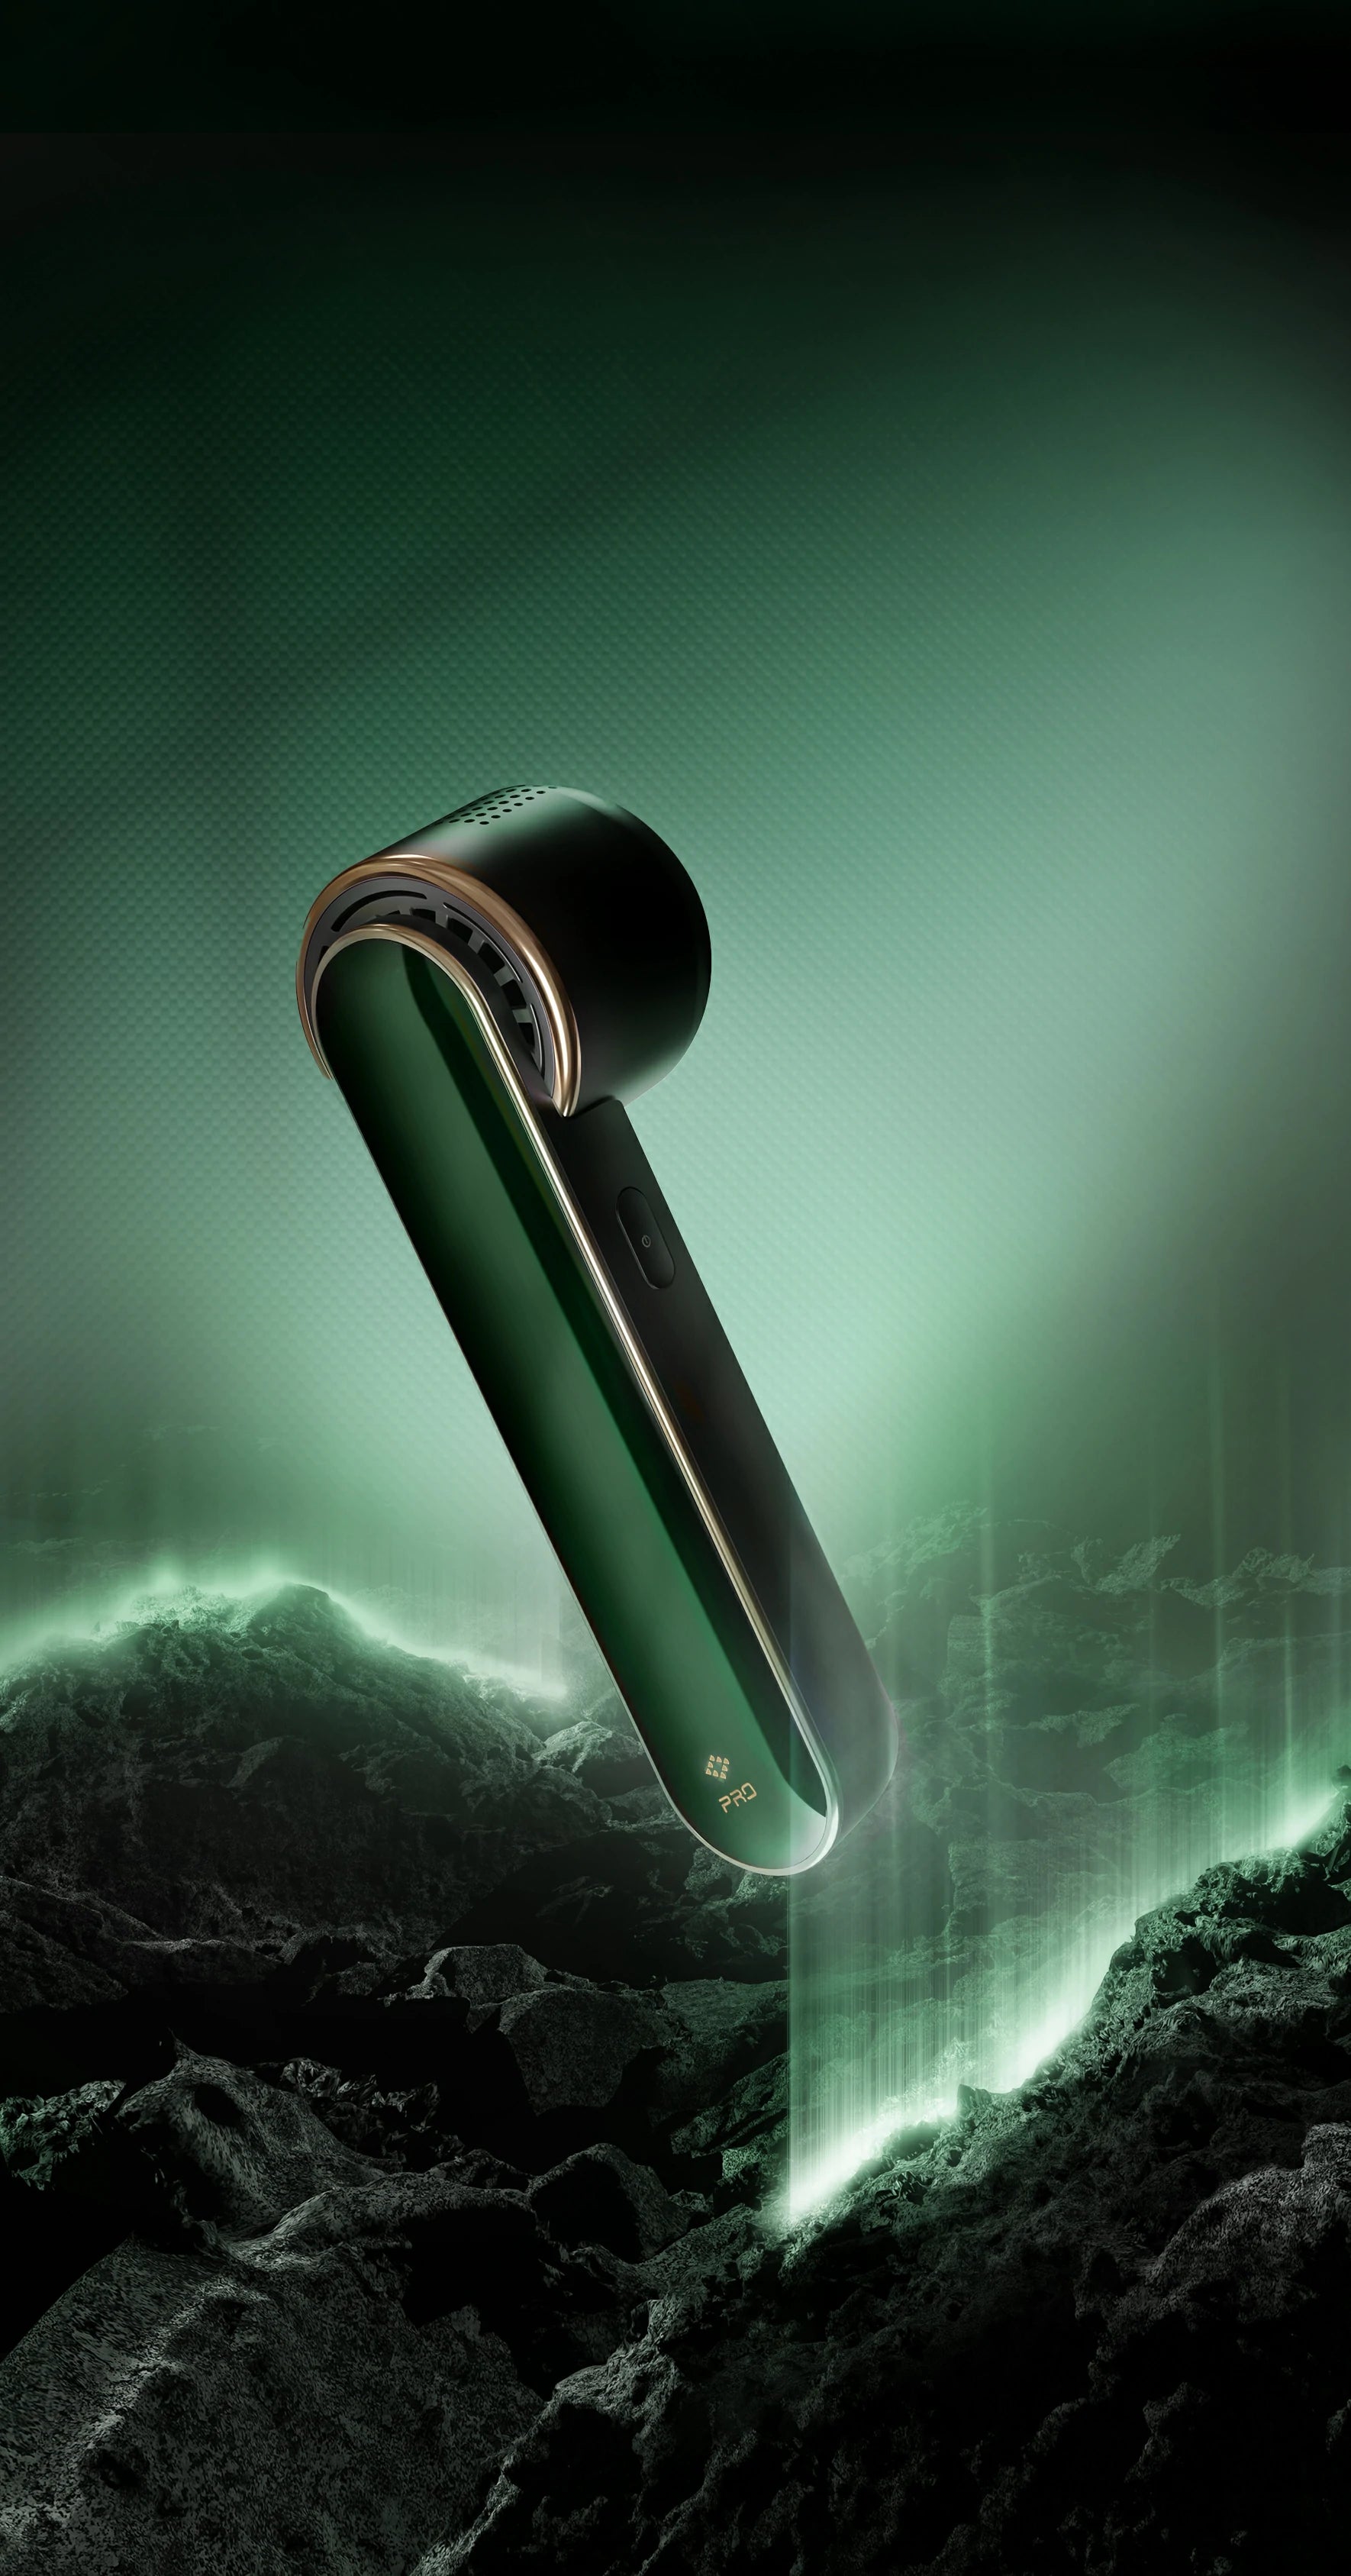 JOVS Blacken PRO DPL Photofacial Skincare Device with Radiant Green Light and Dark Background.